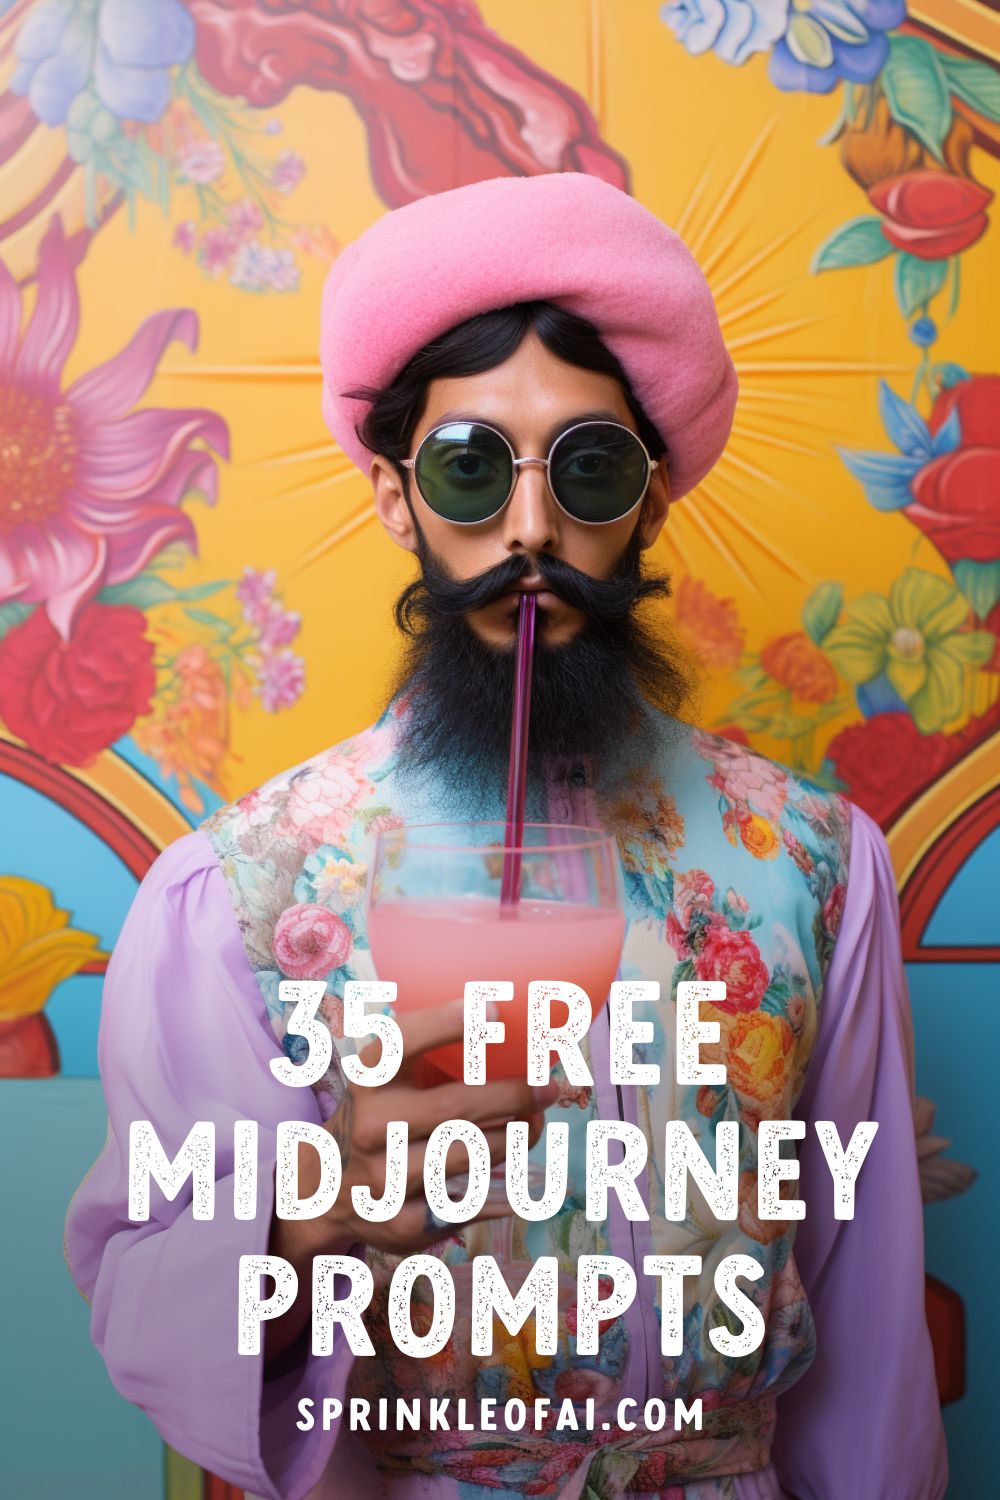 35 Free Best Midjourney Prompts You Need to Try - Sprinkle of AI ART MIdjourney for Beginners